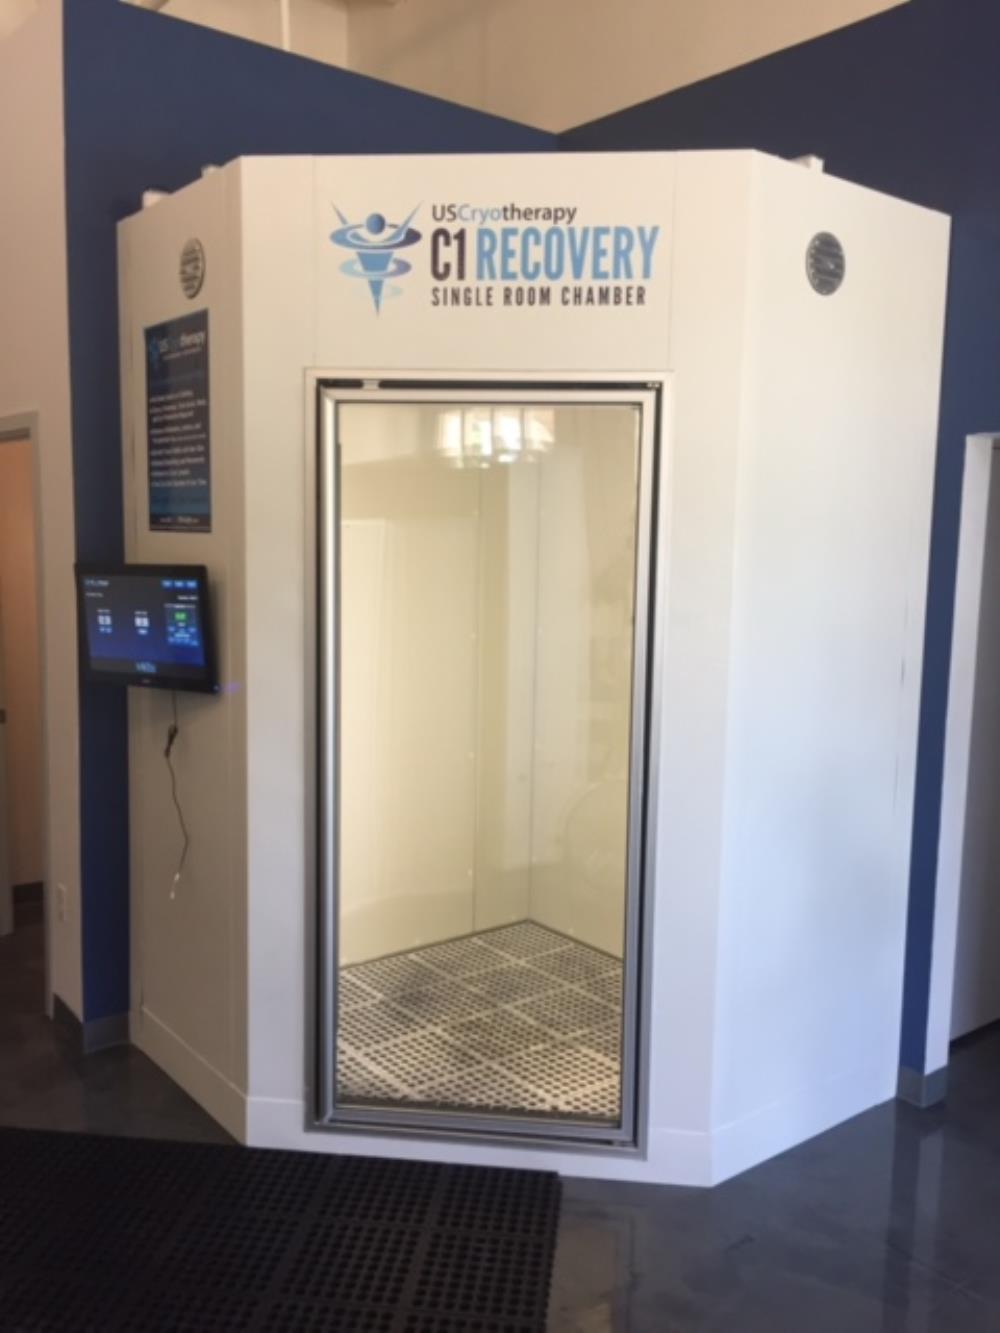 TWC Services installs a new cryotherapy unit